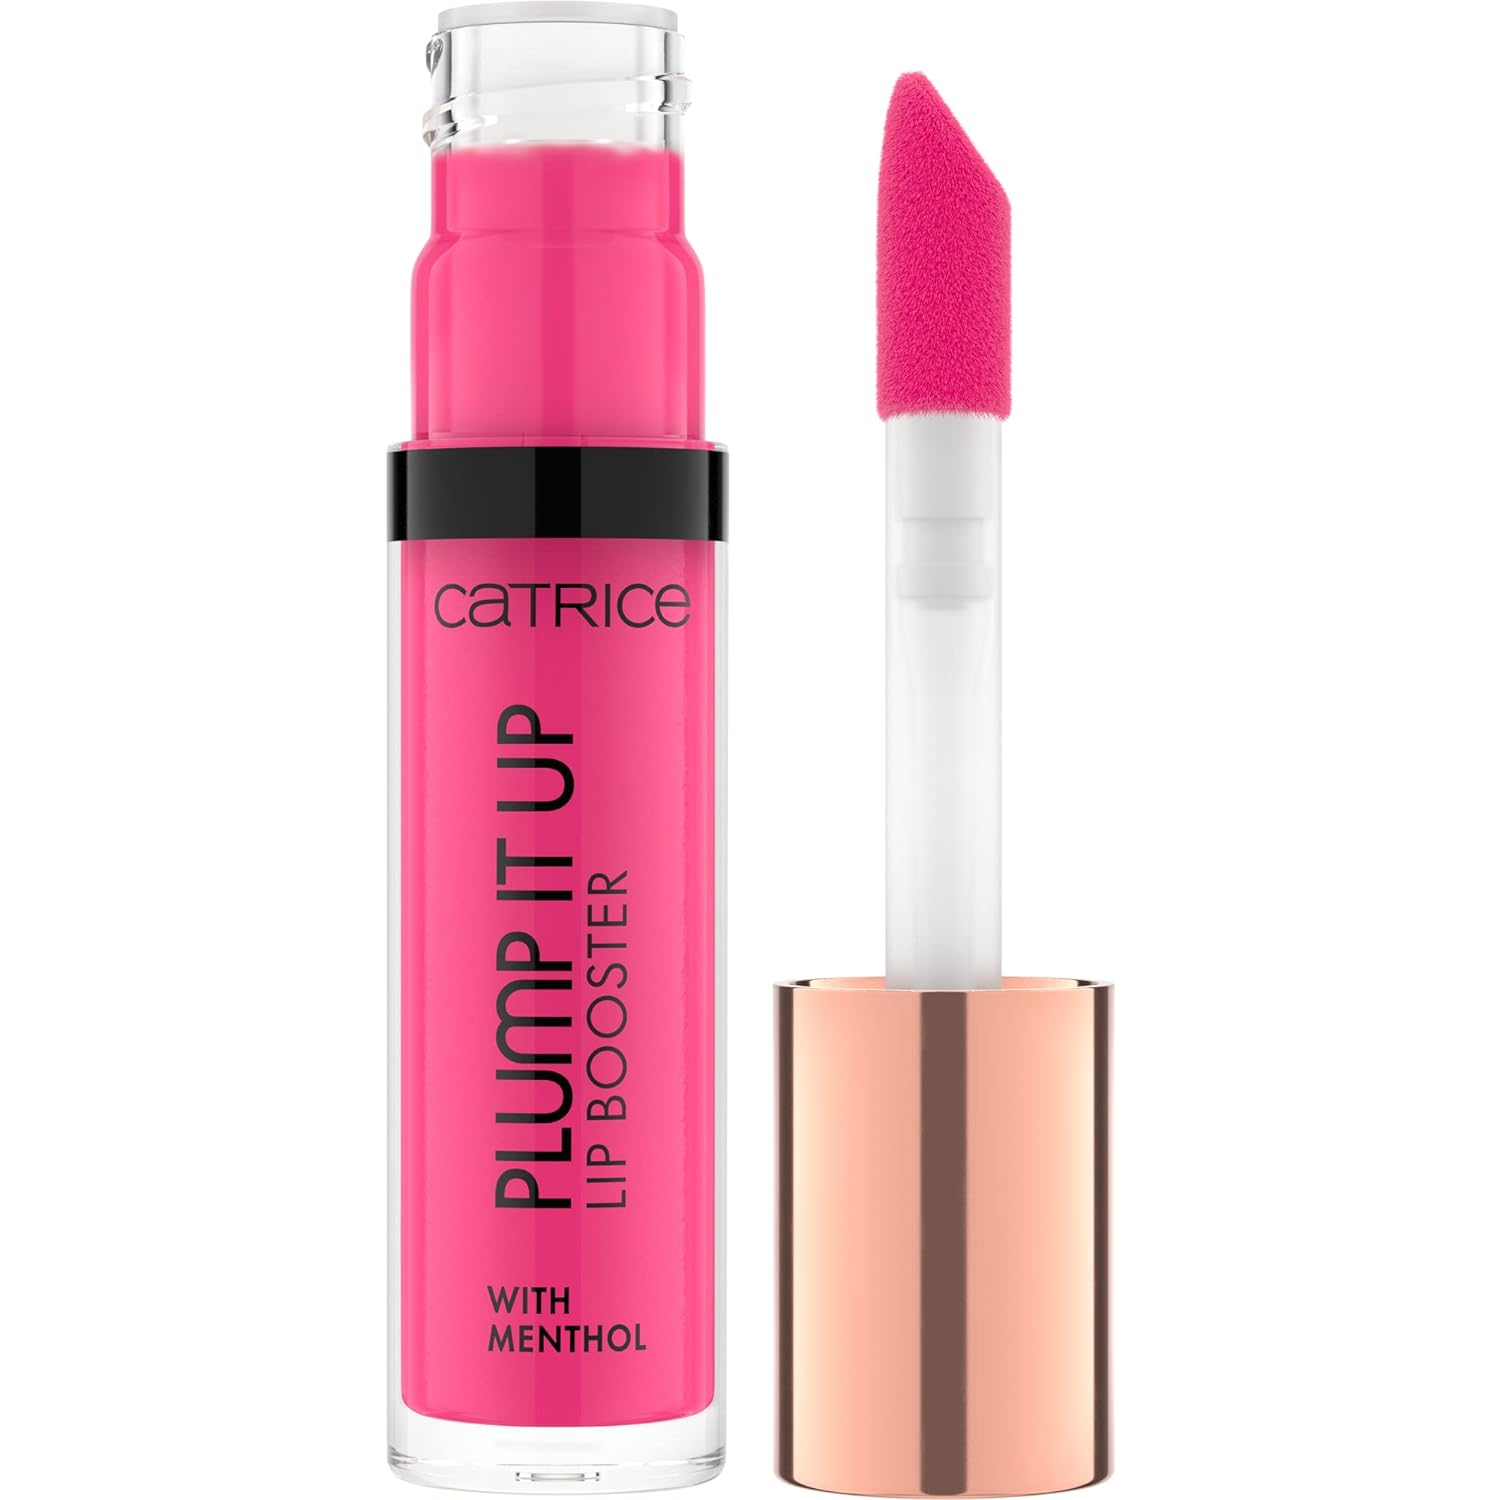 Catrice Plump IT Up Lip Booster, Lip Gloss, No. 080 Overdosed on Confidence, Pink, Cooling, Coloring Effect, Adds Volume, Glossy, Vegan, Alcohol-Free, 3.5 ml